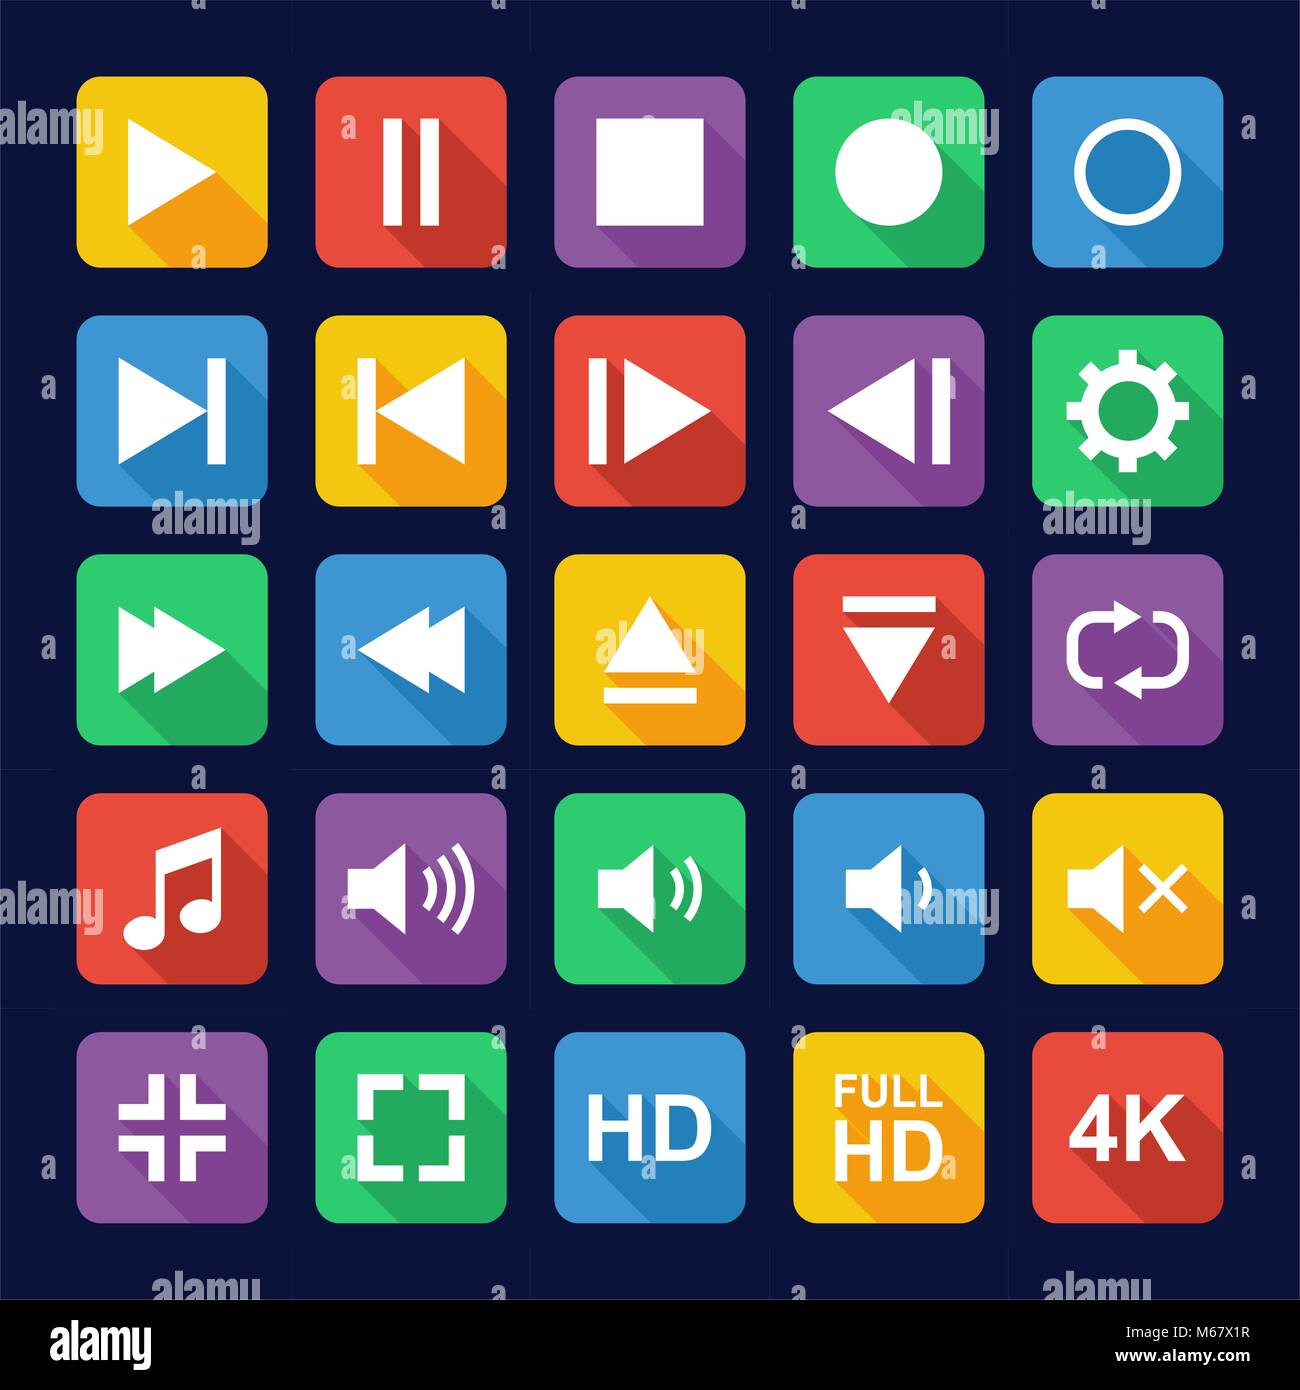 Video Or Music Or Camera Button Icons Flat Design Stock Vector